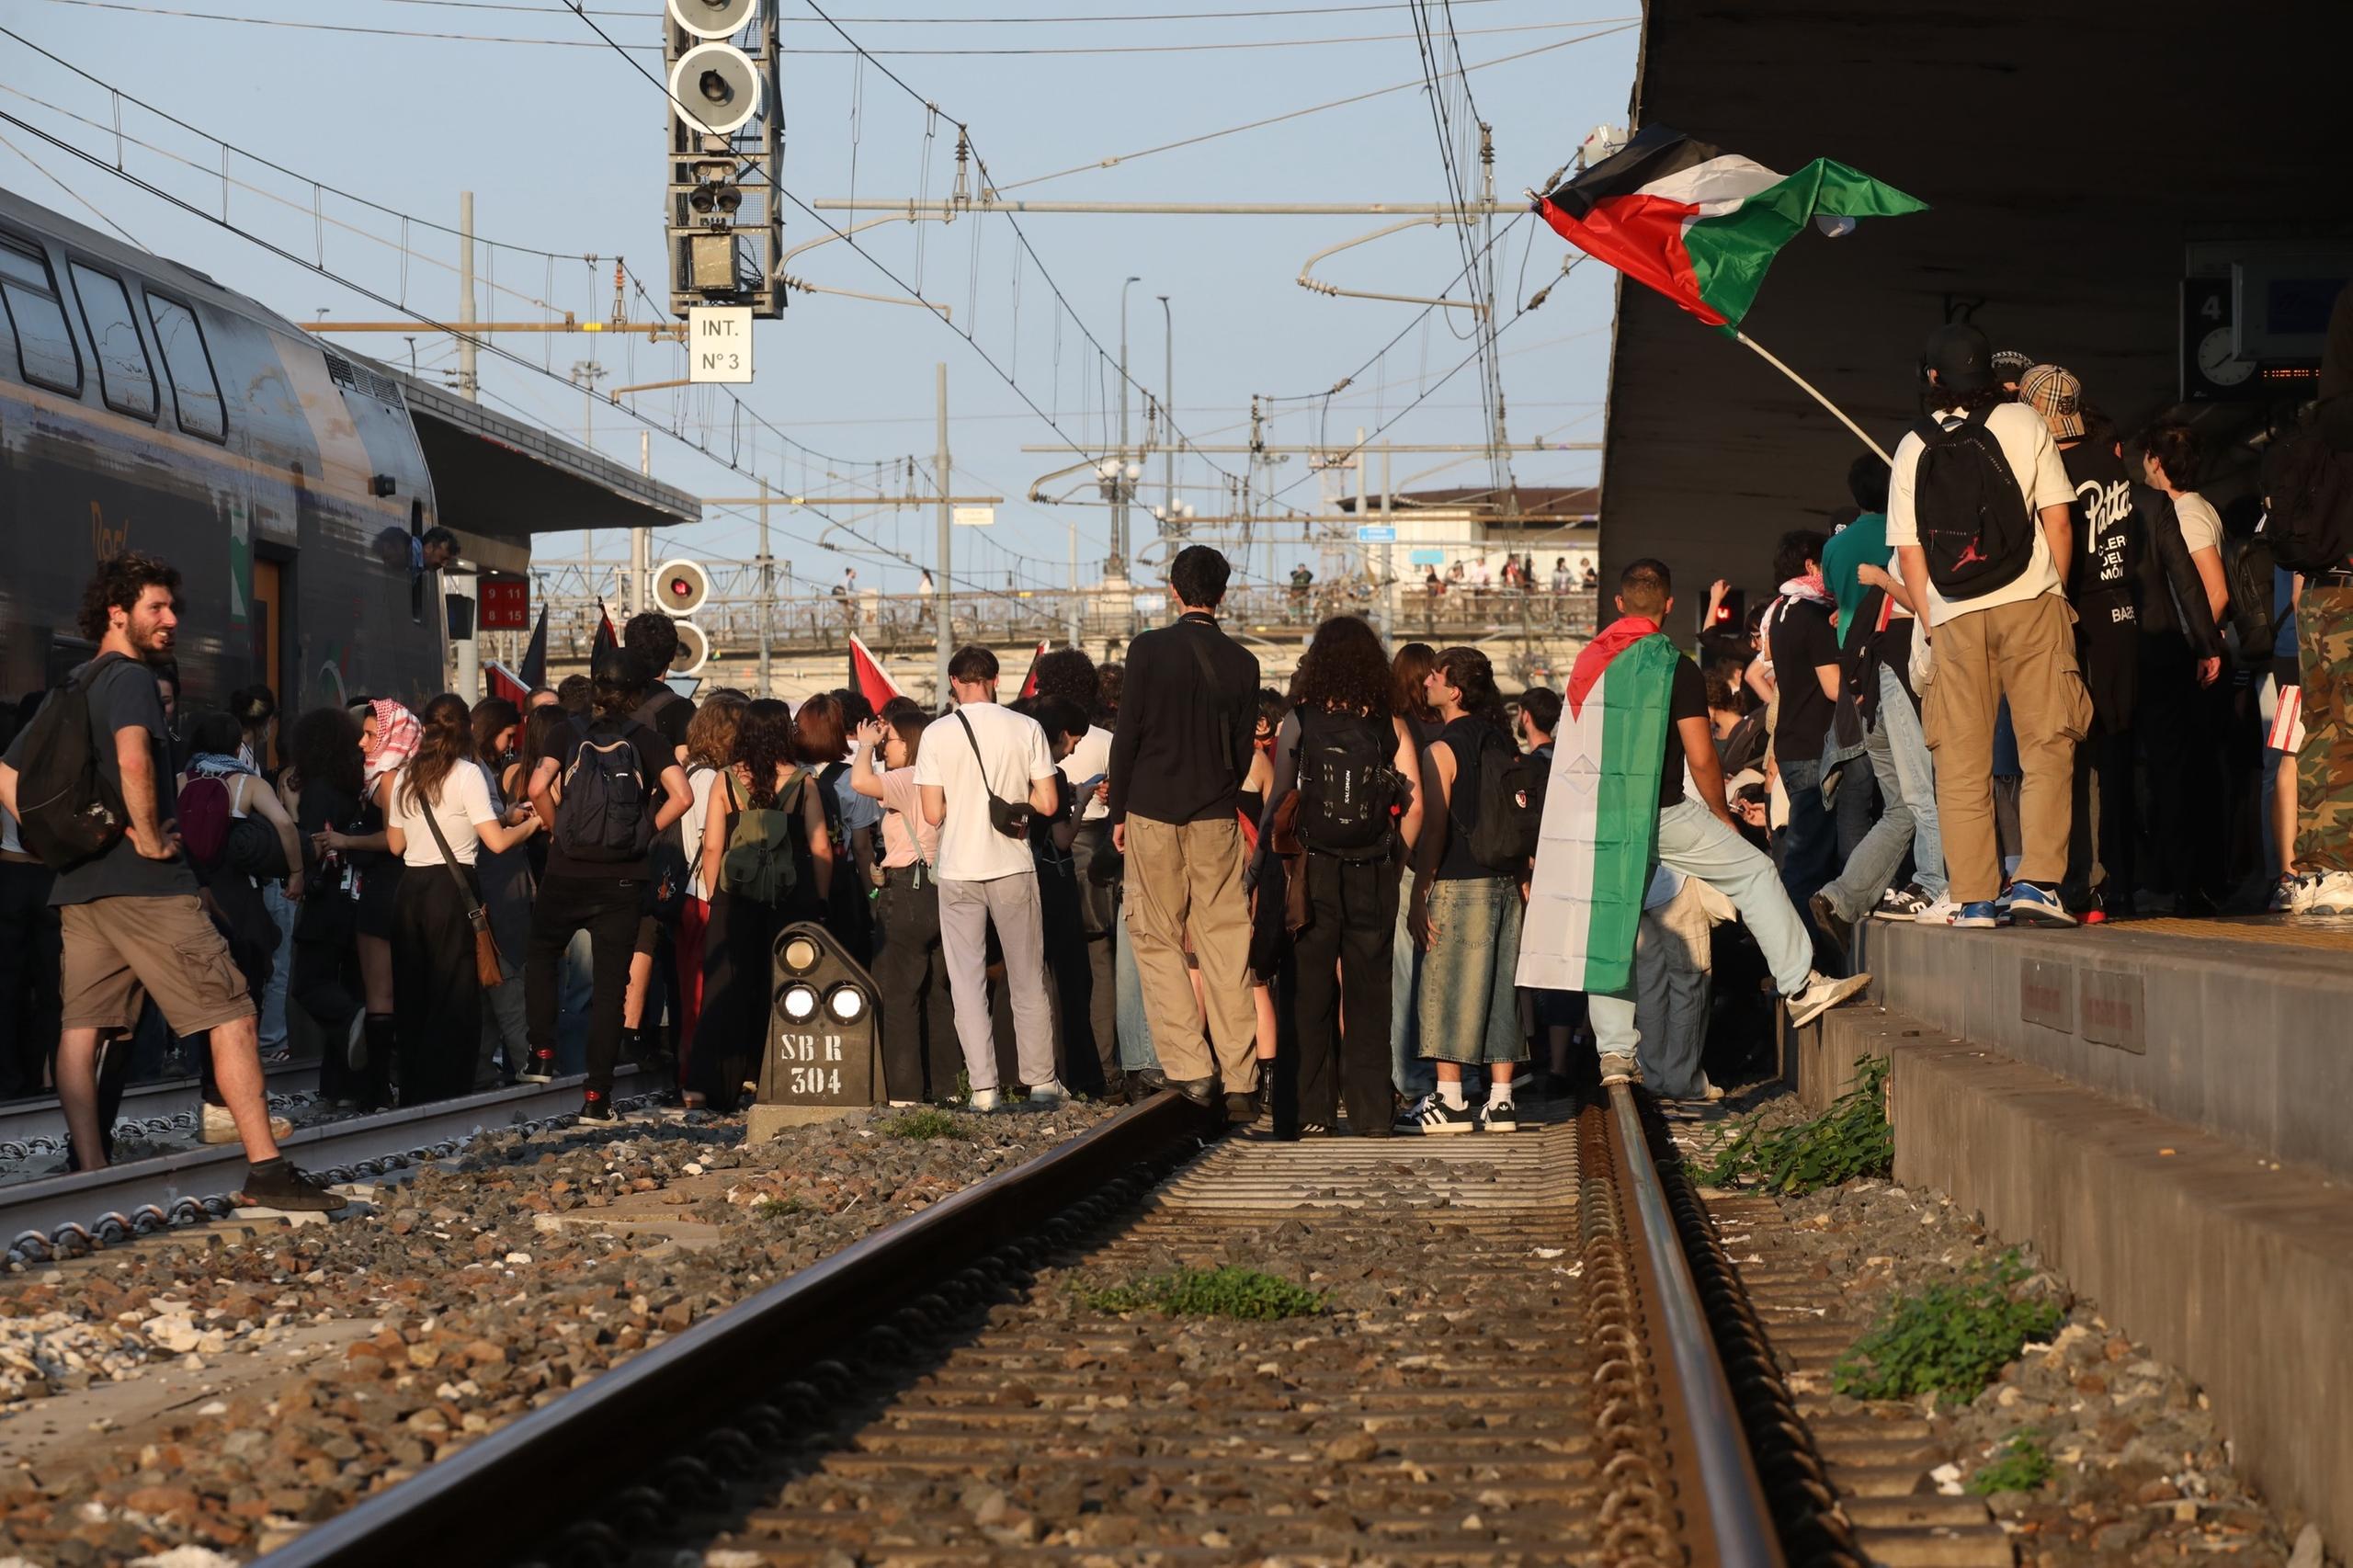 Pro-Palestine protest in Bologna, tons of of activists take the tracks: trains are canceled and delayed